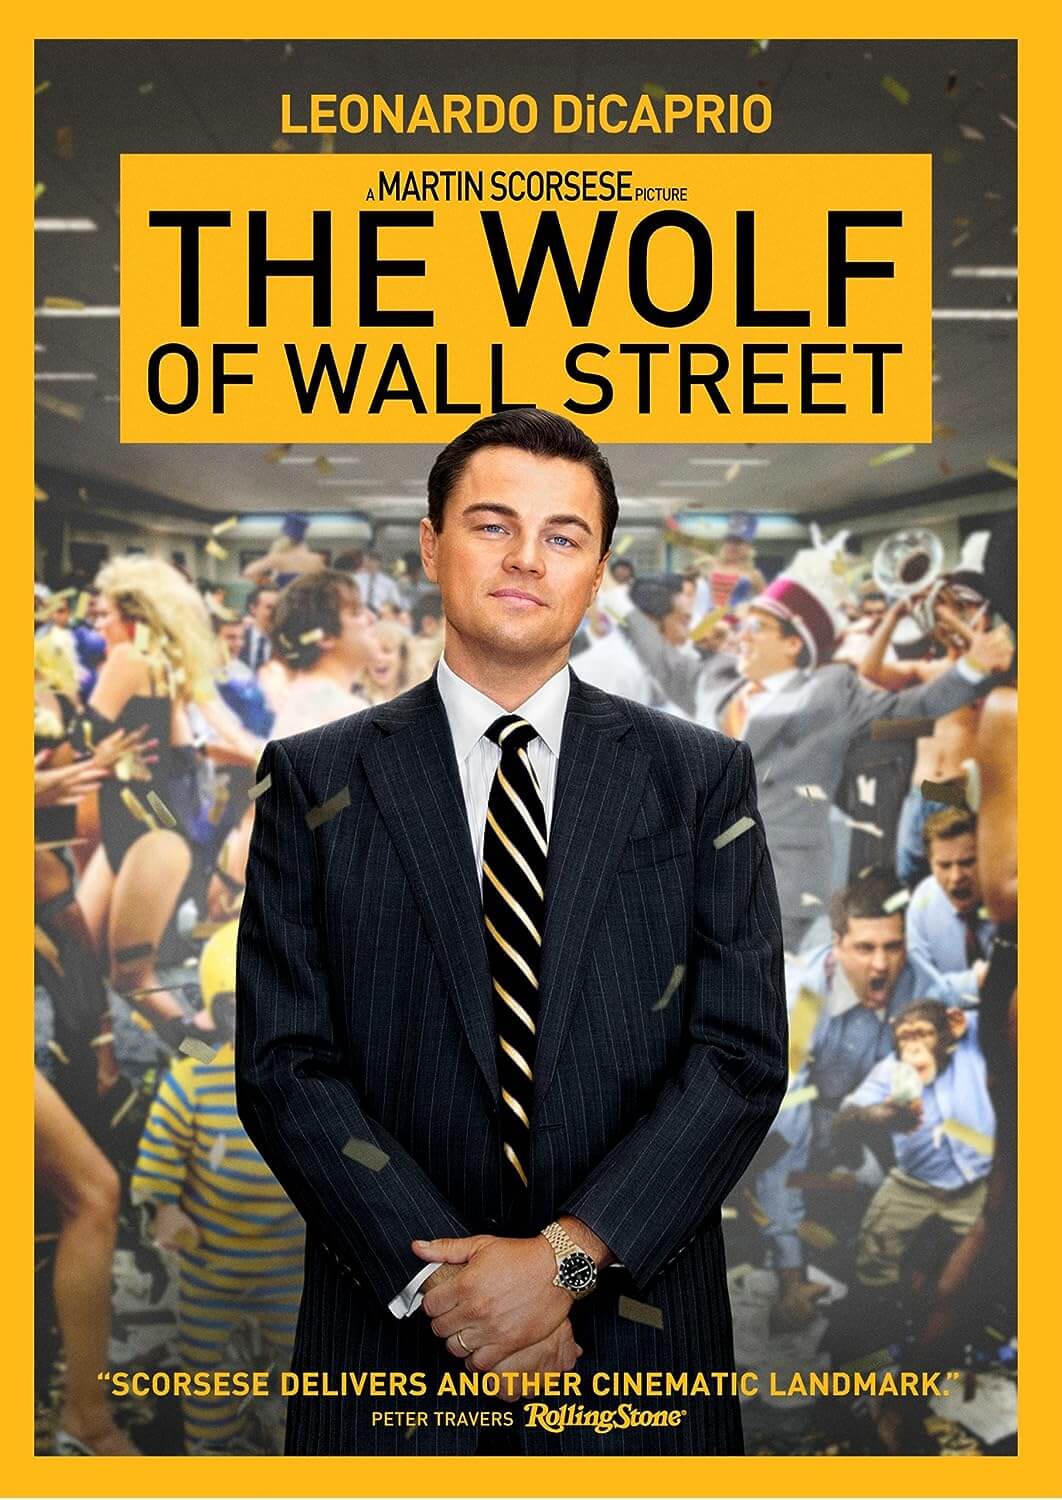 “The Wolf of Wall Street” (2013)